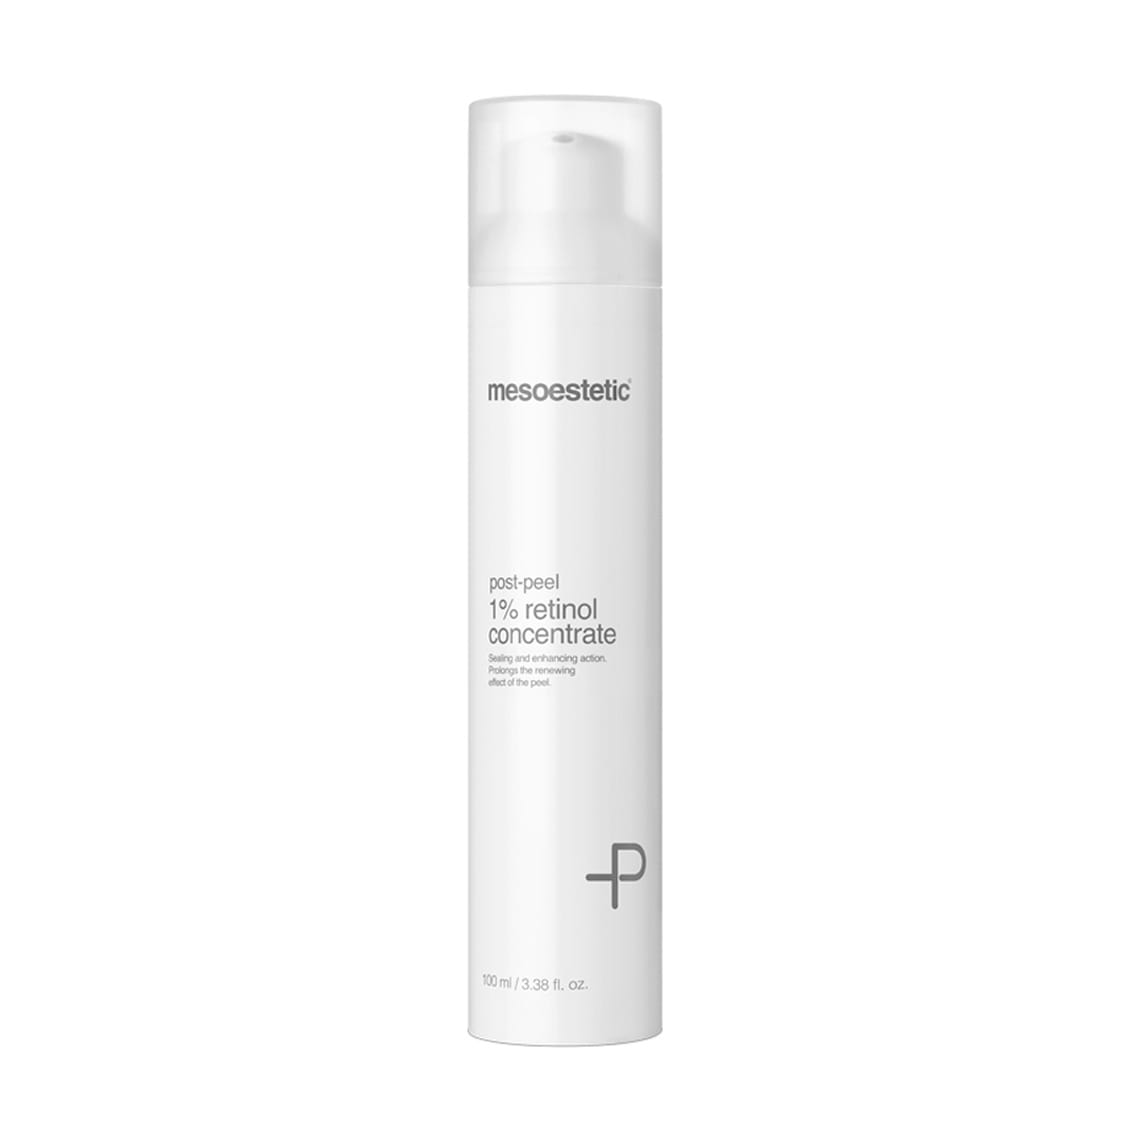 Mesoestetic Post-peel 1% Retinol Concentrate-review-thailand